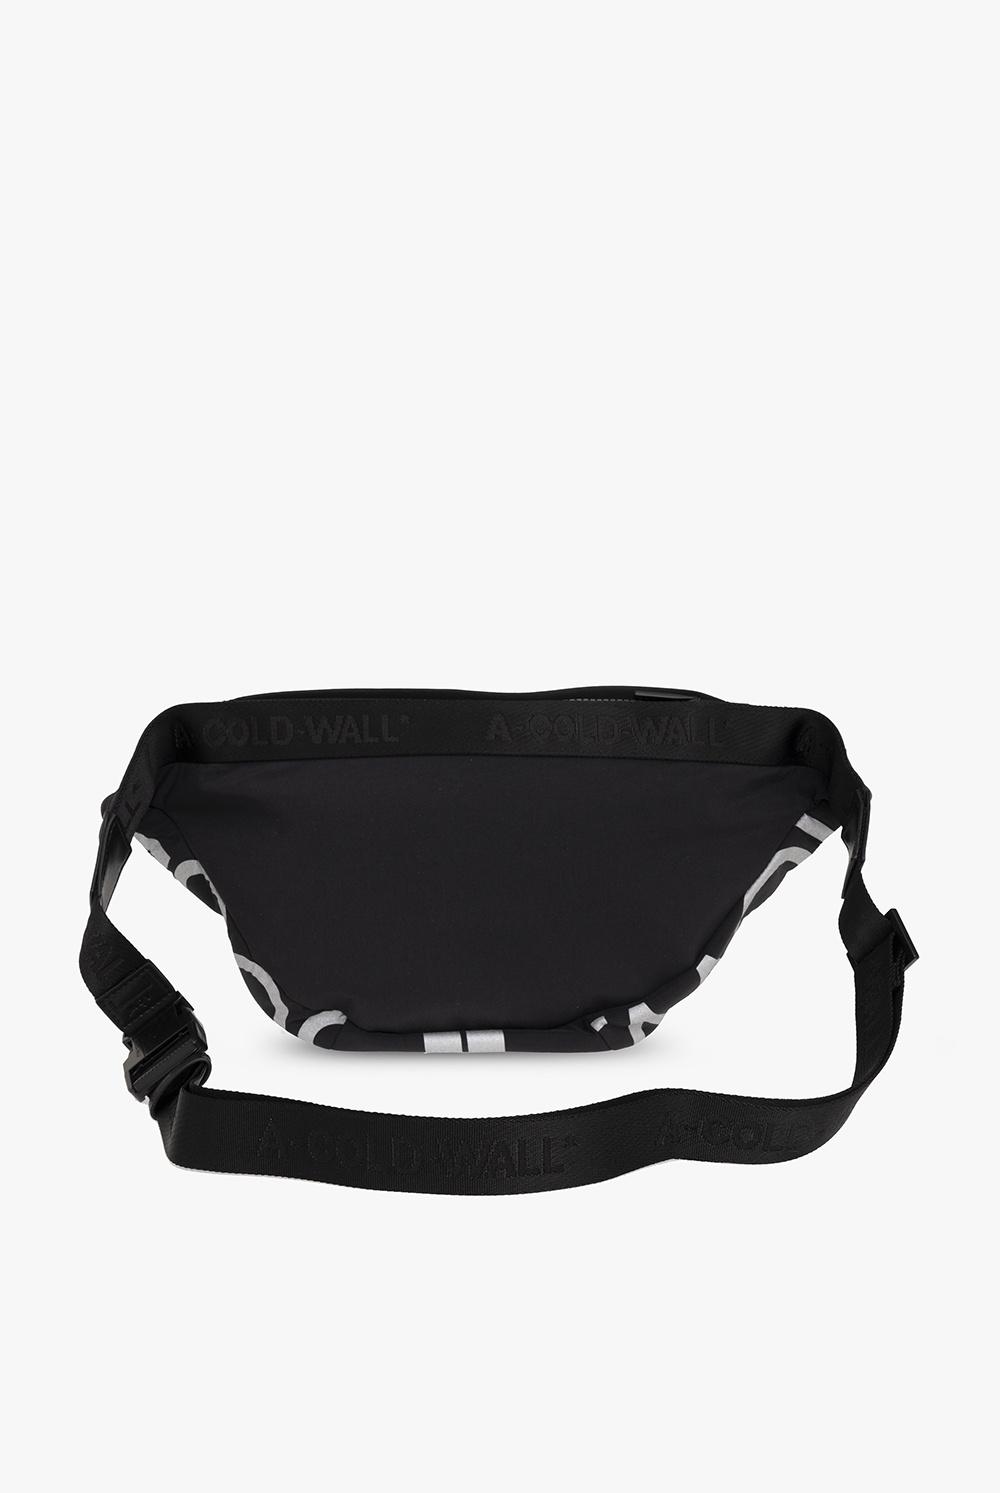 A-COLD-WALL* Belt bag print with logo